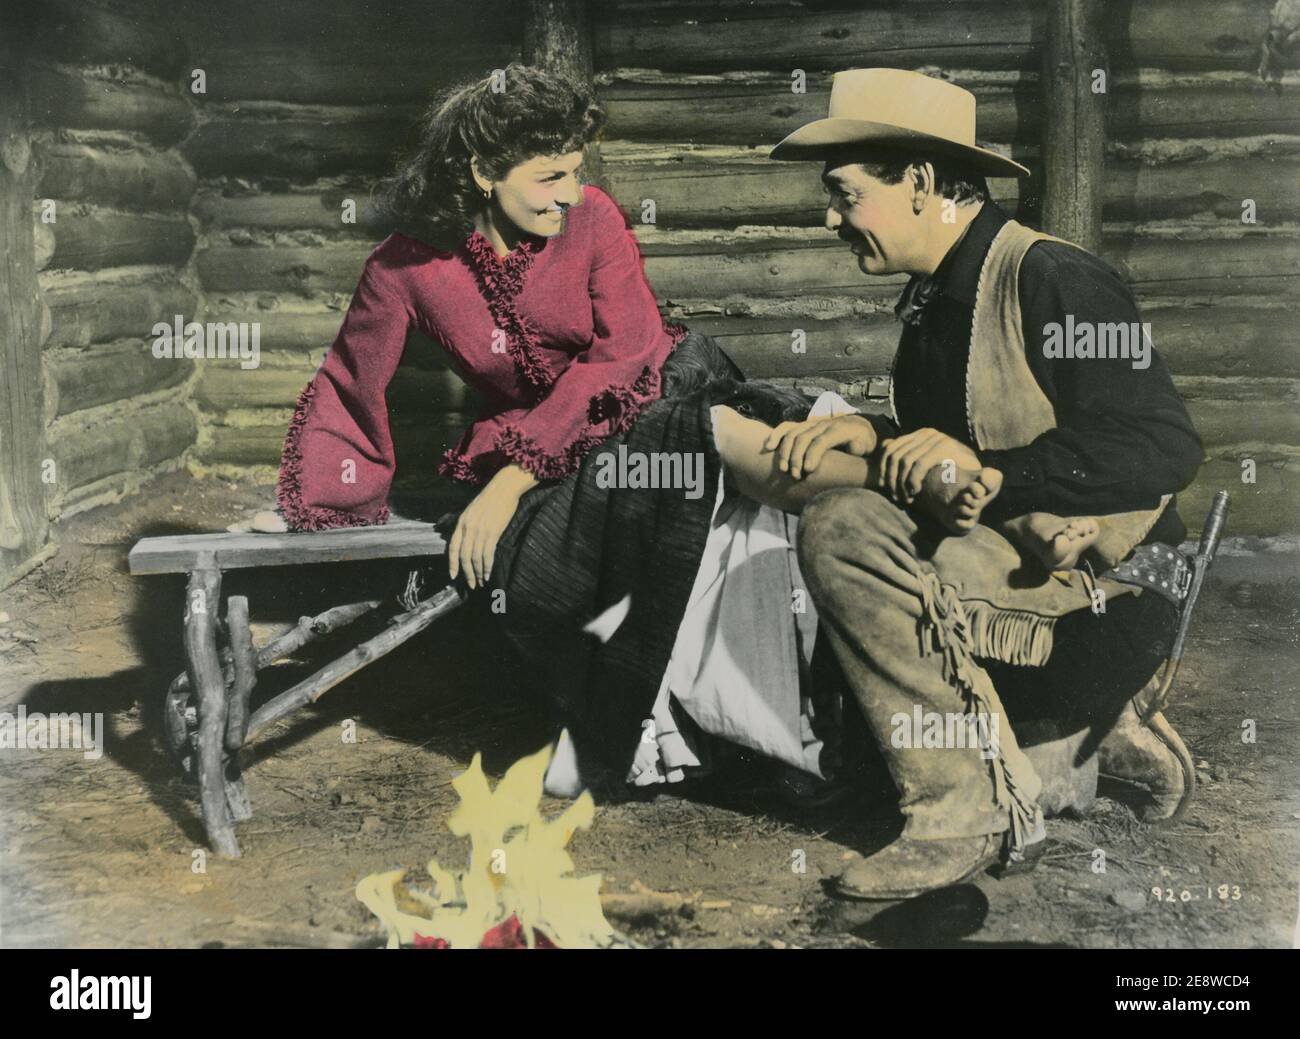 The Tall Men. A 1955 american western film starring Jane Russell and Clark Gable. Jane Russel was born june 21 1921 and died february 28 2011. The movie had premiere on september 22 1955. Stock Photo